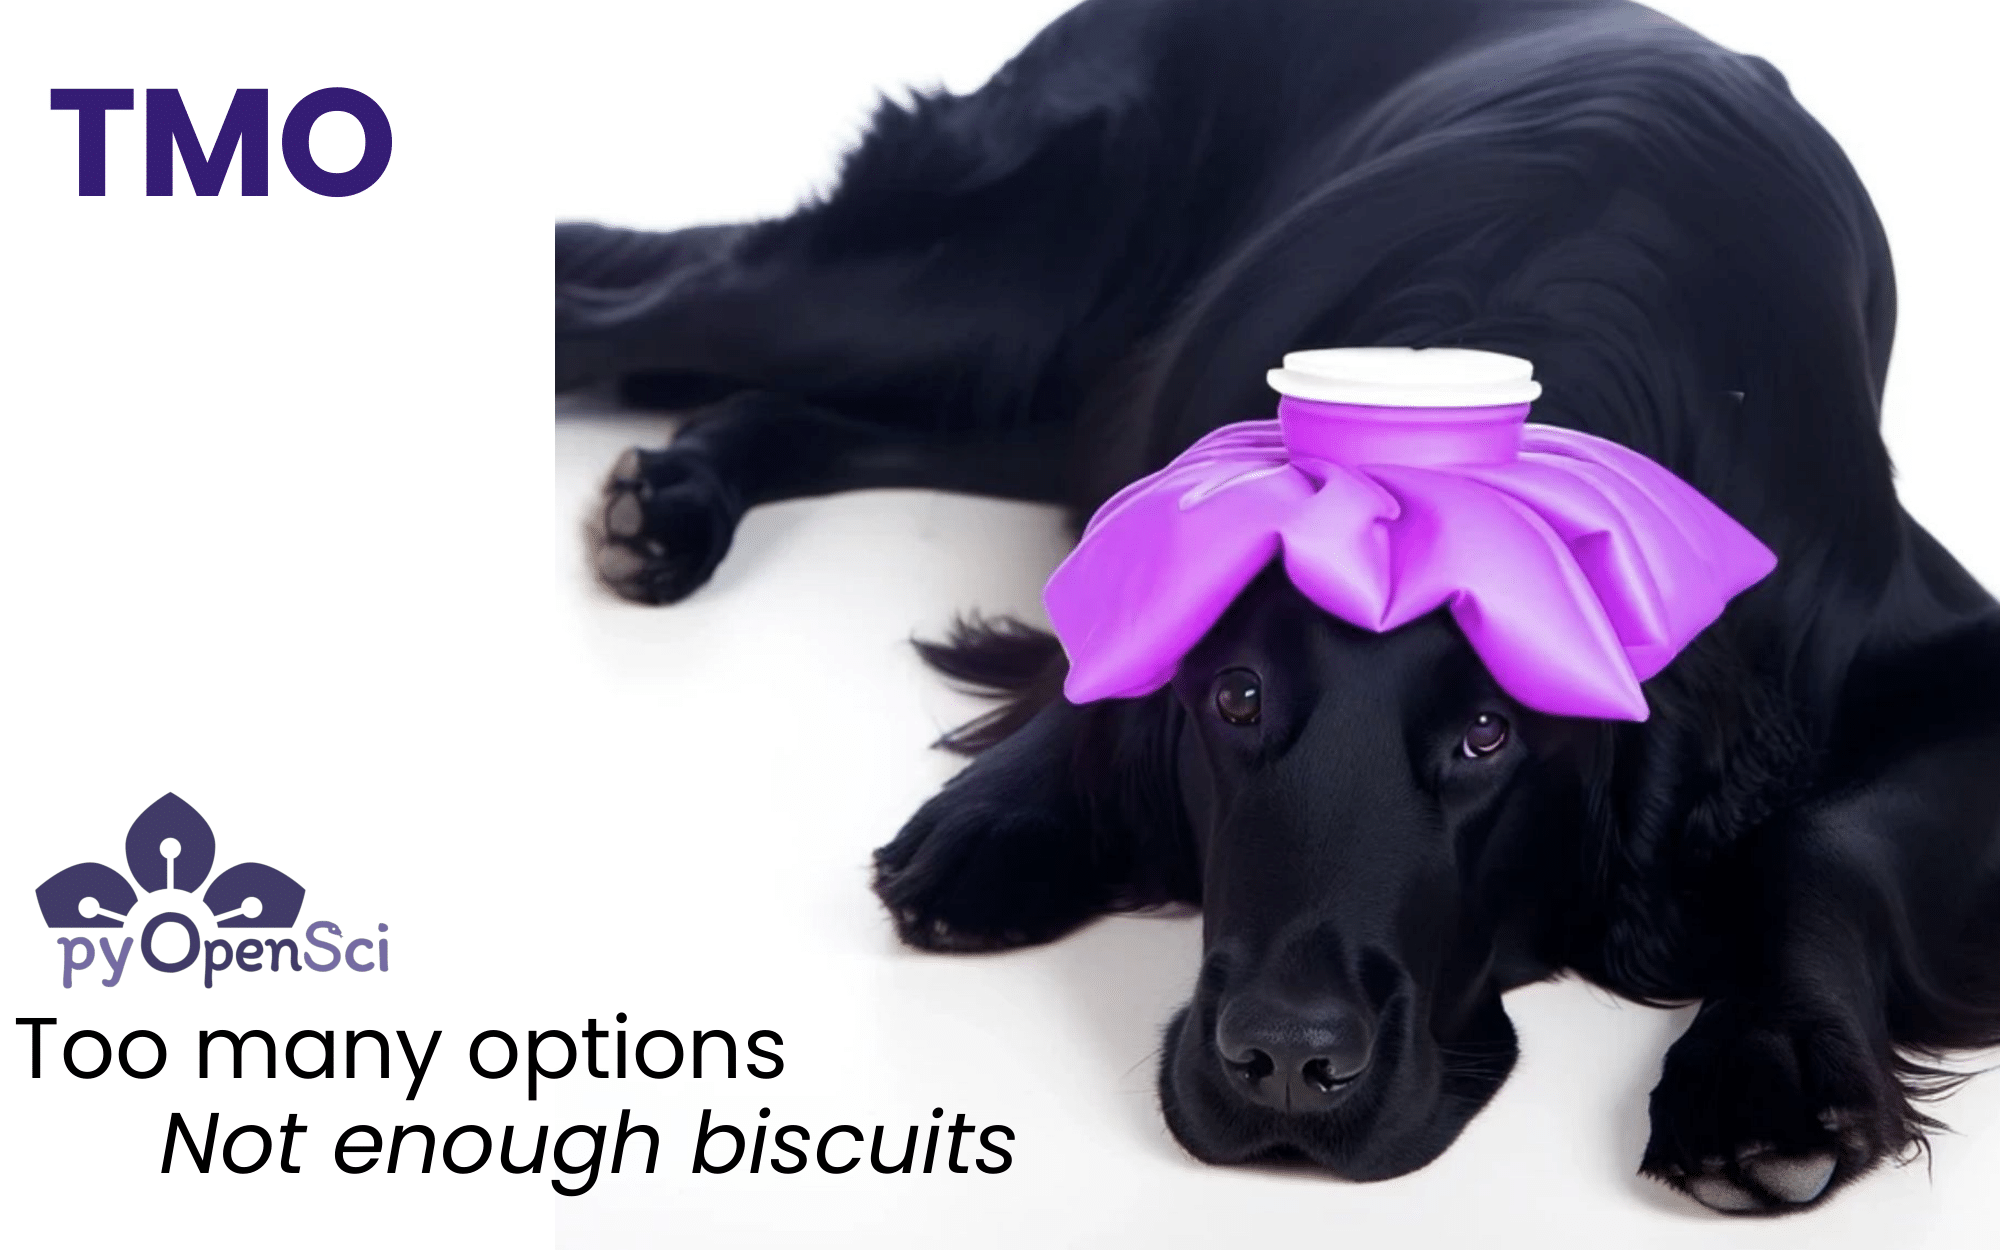 Image of a flat coated retriever lying down with a purple ice bag on its head looking sad.